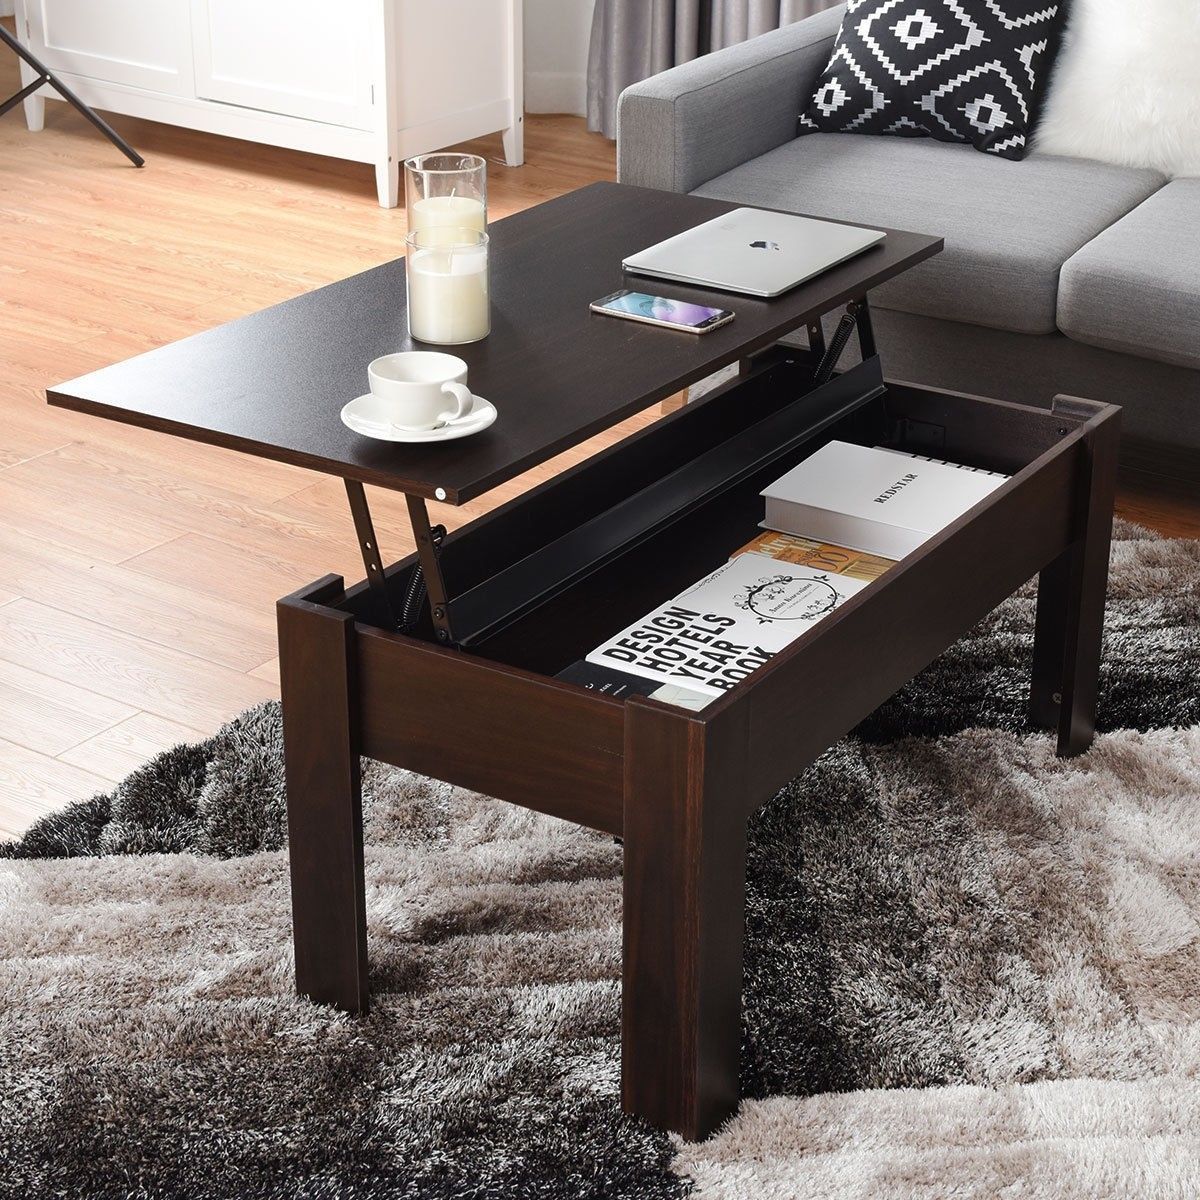 Modern Furniture Hidden Compartment Lift Tabletop Coffee Table | Coffee Pertaining To Modern Coffee Tables With Hidden Storage Compartments (Gallery 9 of 20)